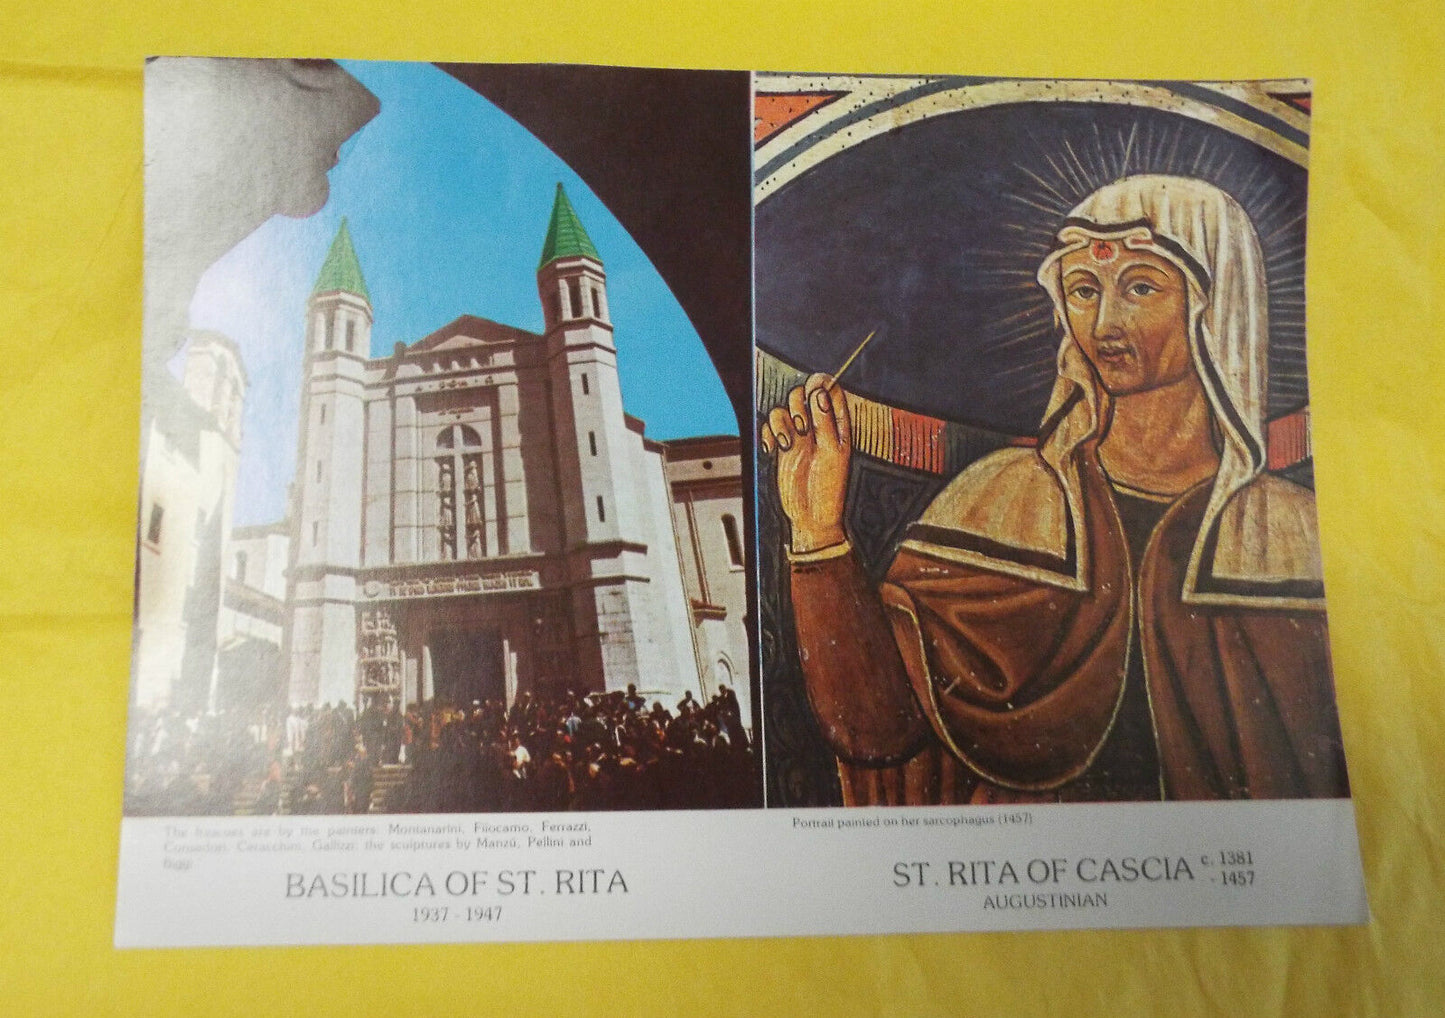 St. Rita of Cascia Biography + Prayer Card, New from Italy